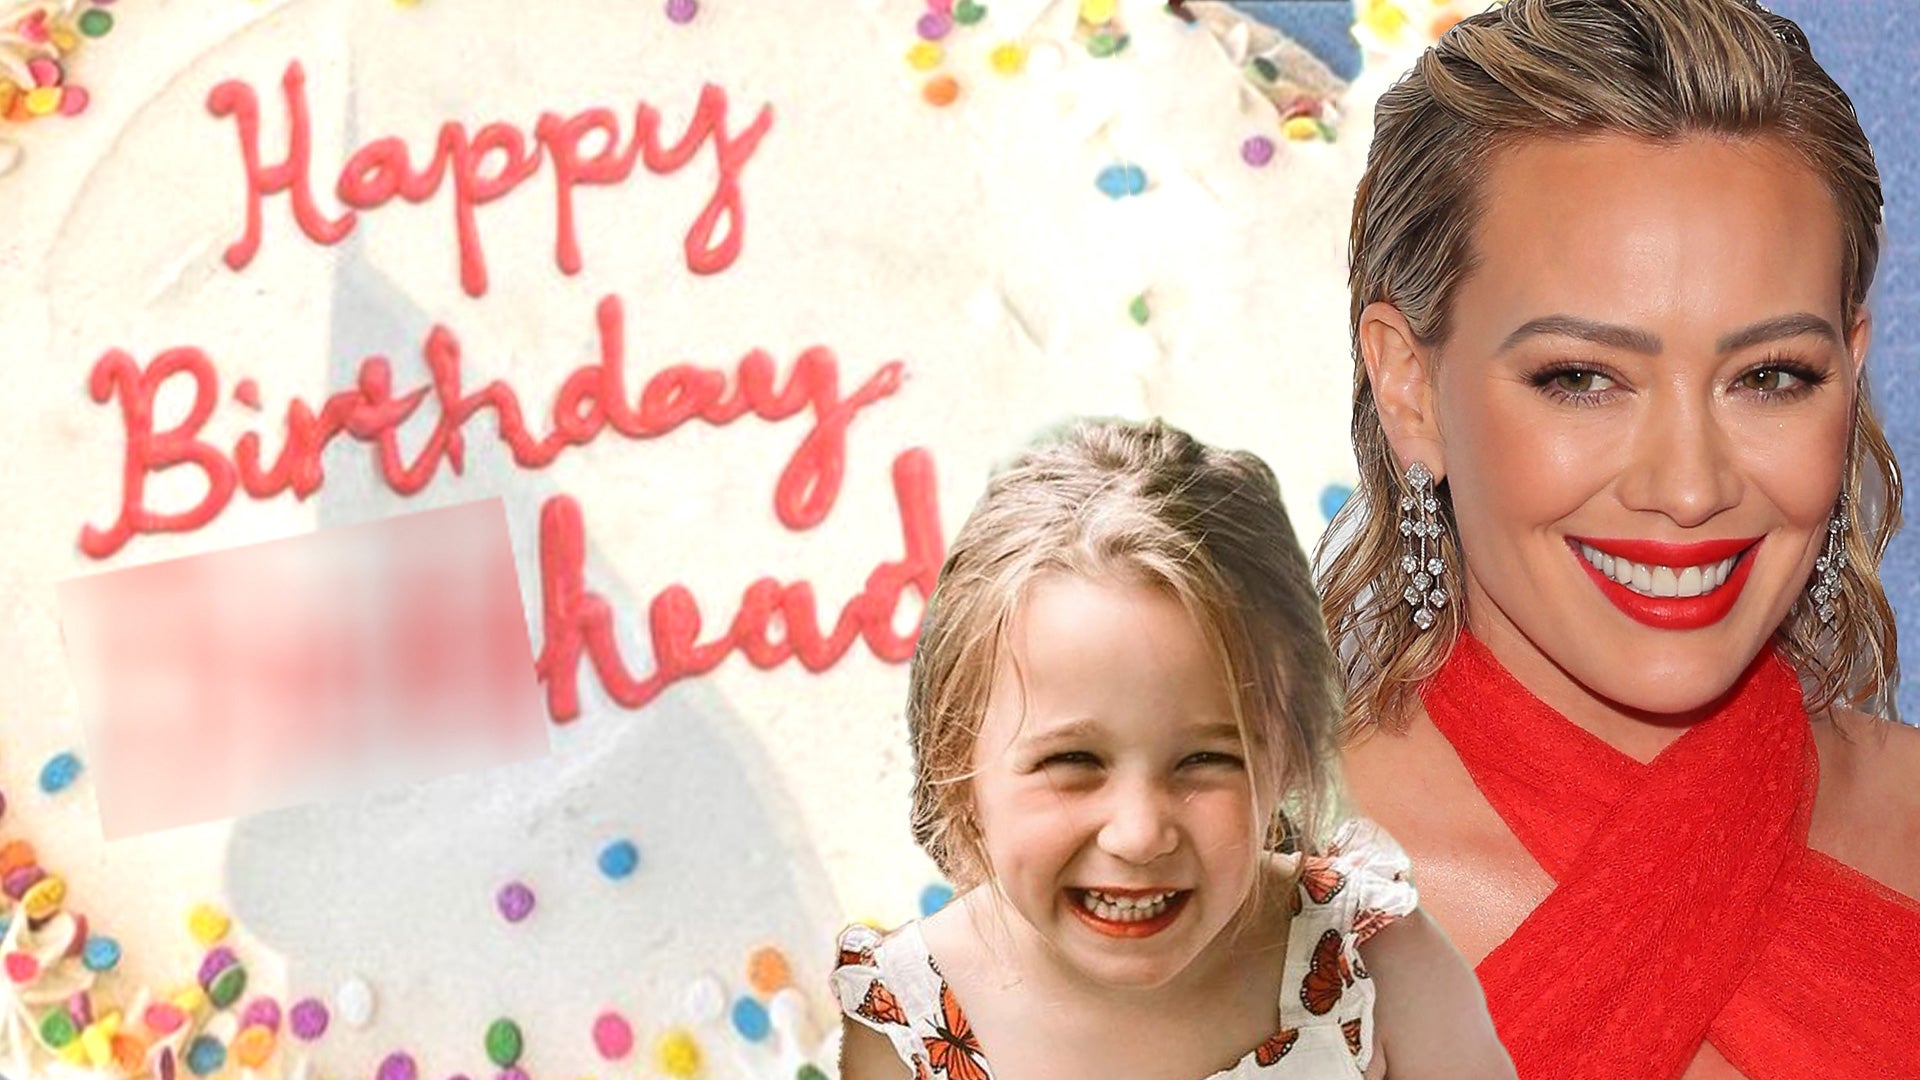 Hilary Duff's 4-Year-Old Daughter Gives Her NSFW Birthday Card 